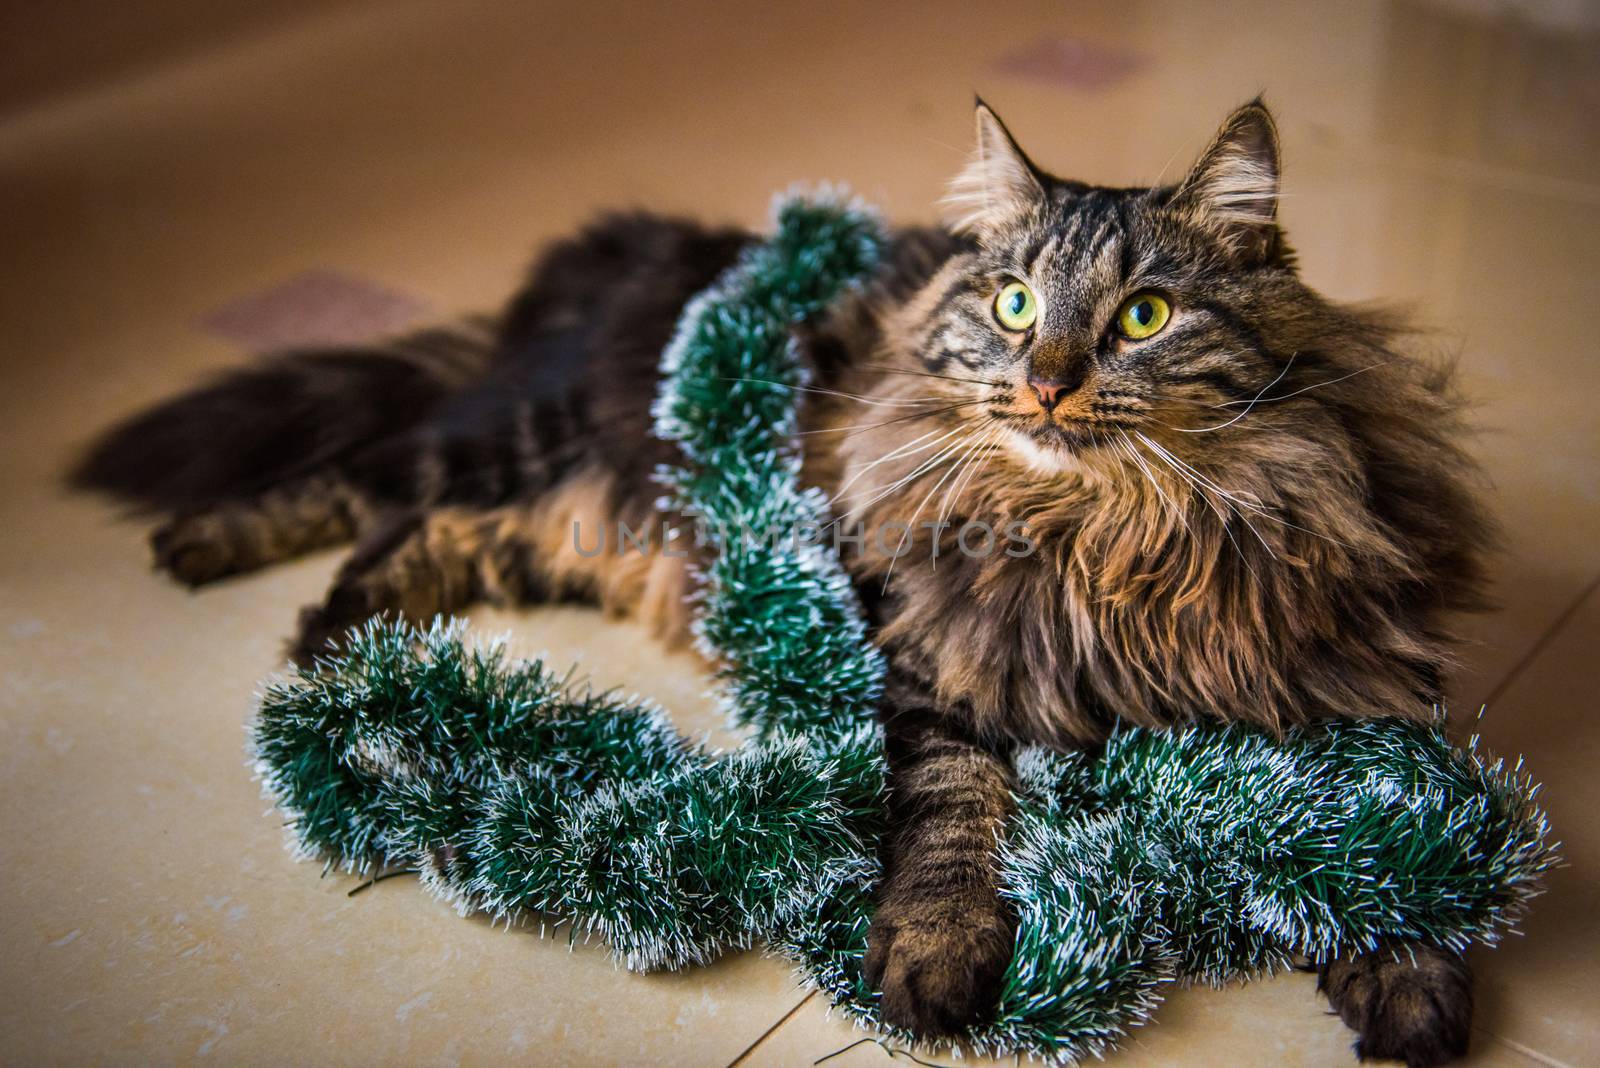 Funny Norwegian cat with garlands under Christmas tree on New Year. Cat plays with Christmas tree toys